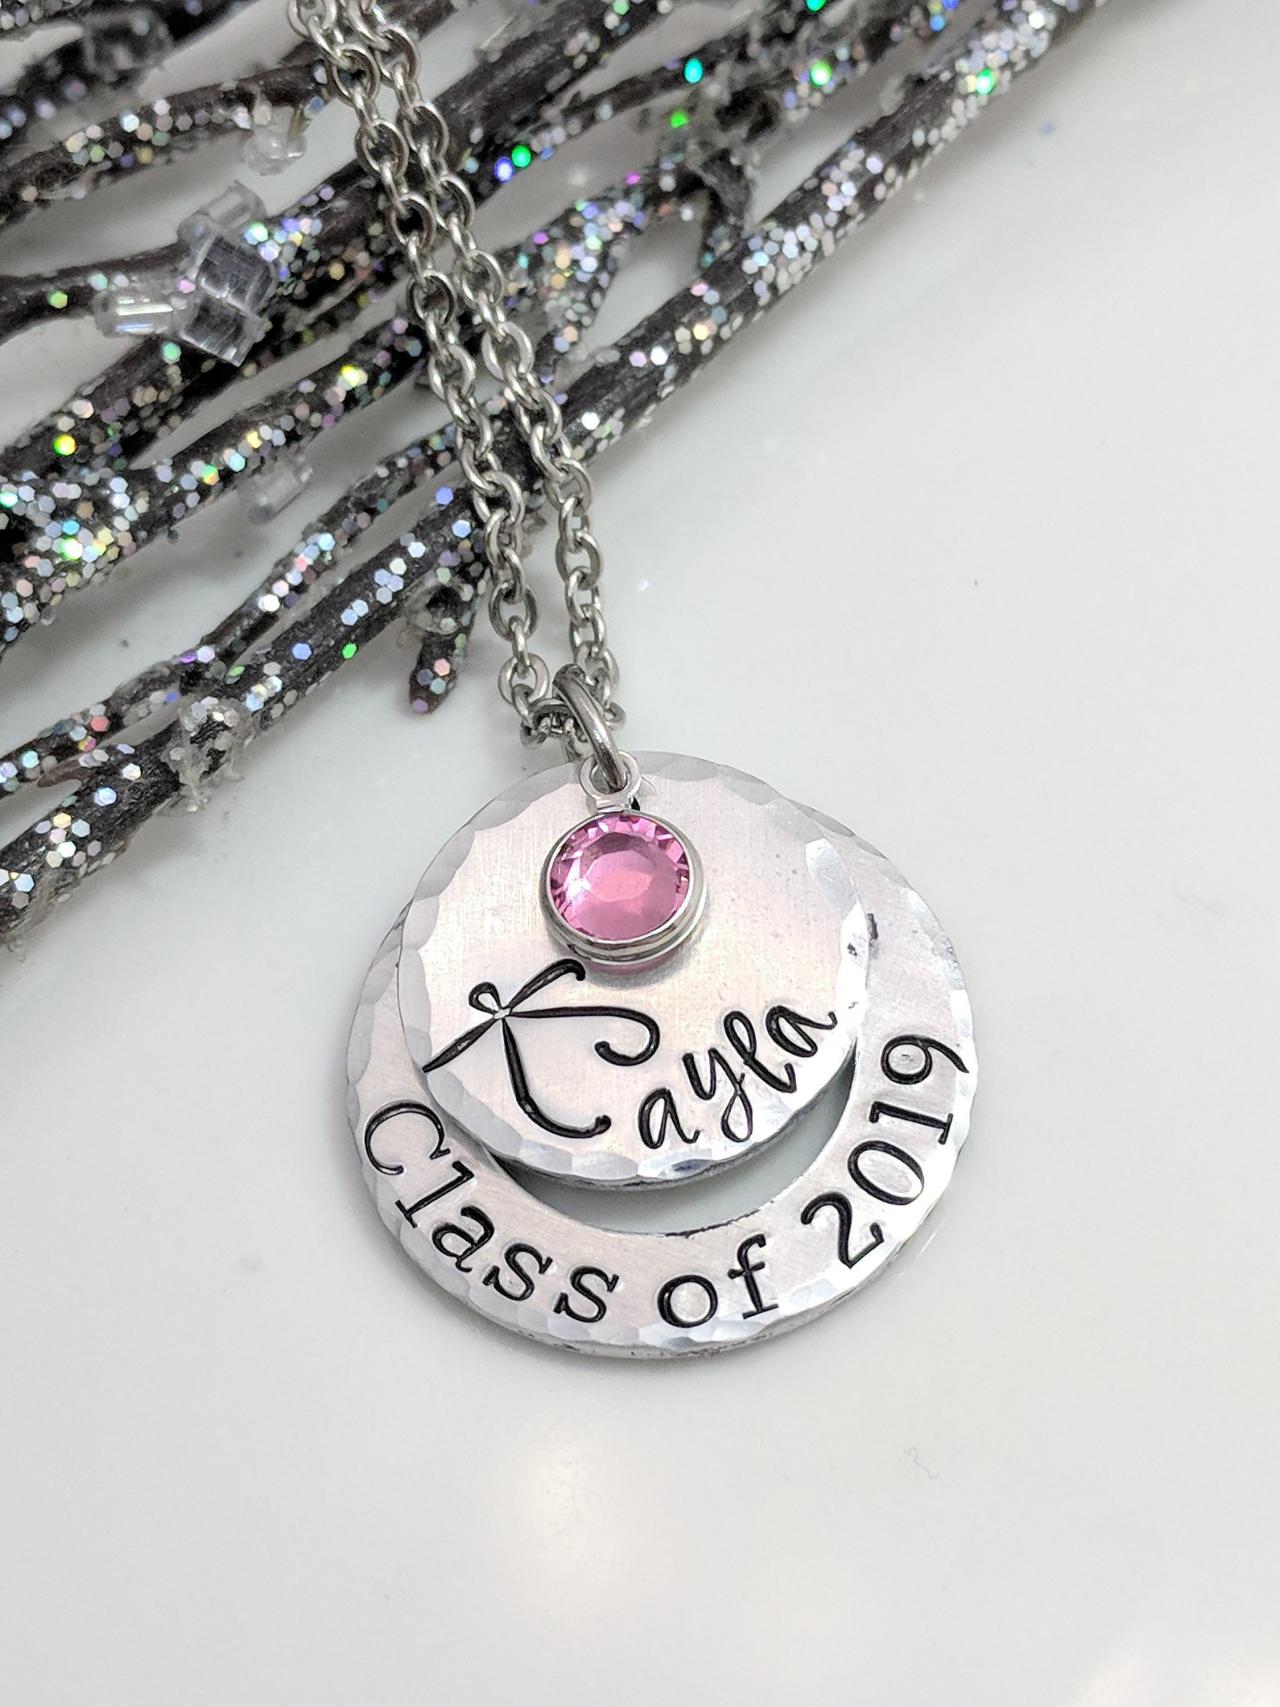 Class Of 2019 Hand Stamped Necklace- Personalized- Hand Stamped- Graduation Gift- Layered- Graduation Year Necklace- Name Jewelry- College- High